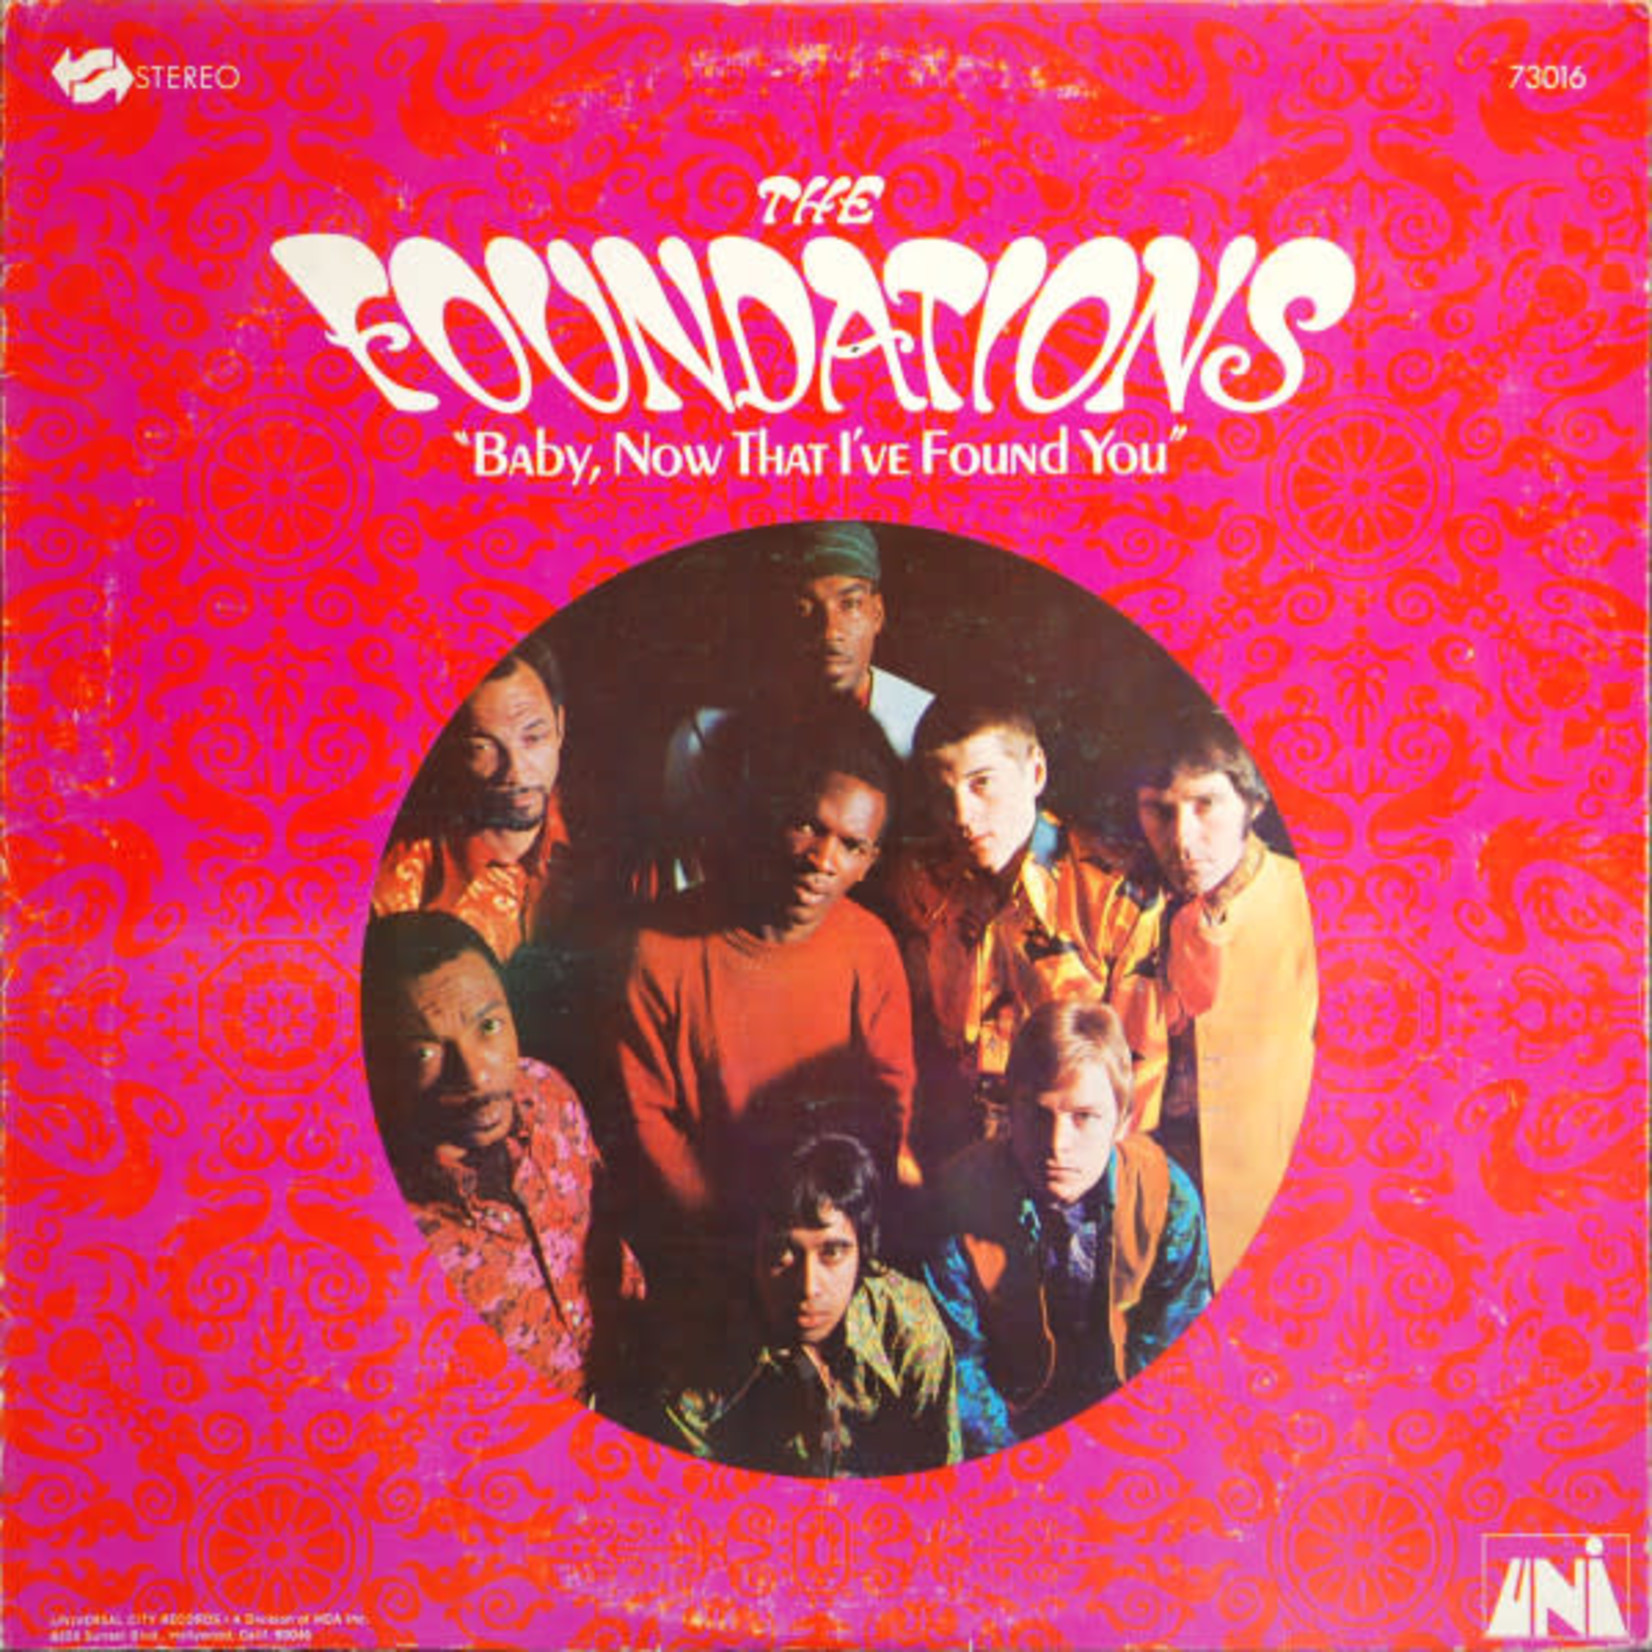 [Vintage] Foundations - Baby, Now That I've Found You